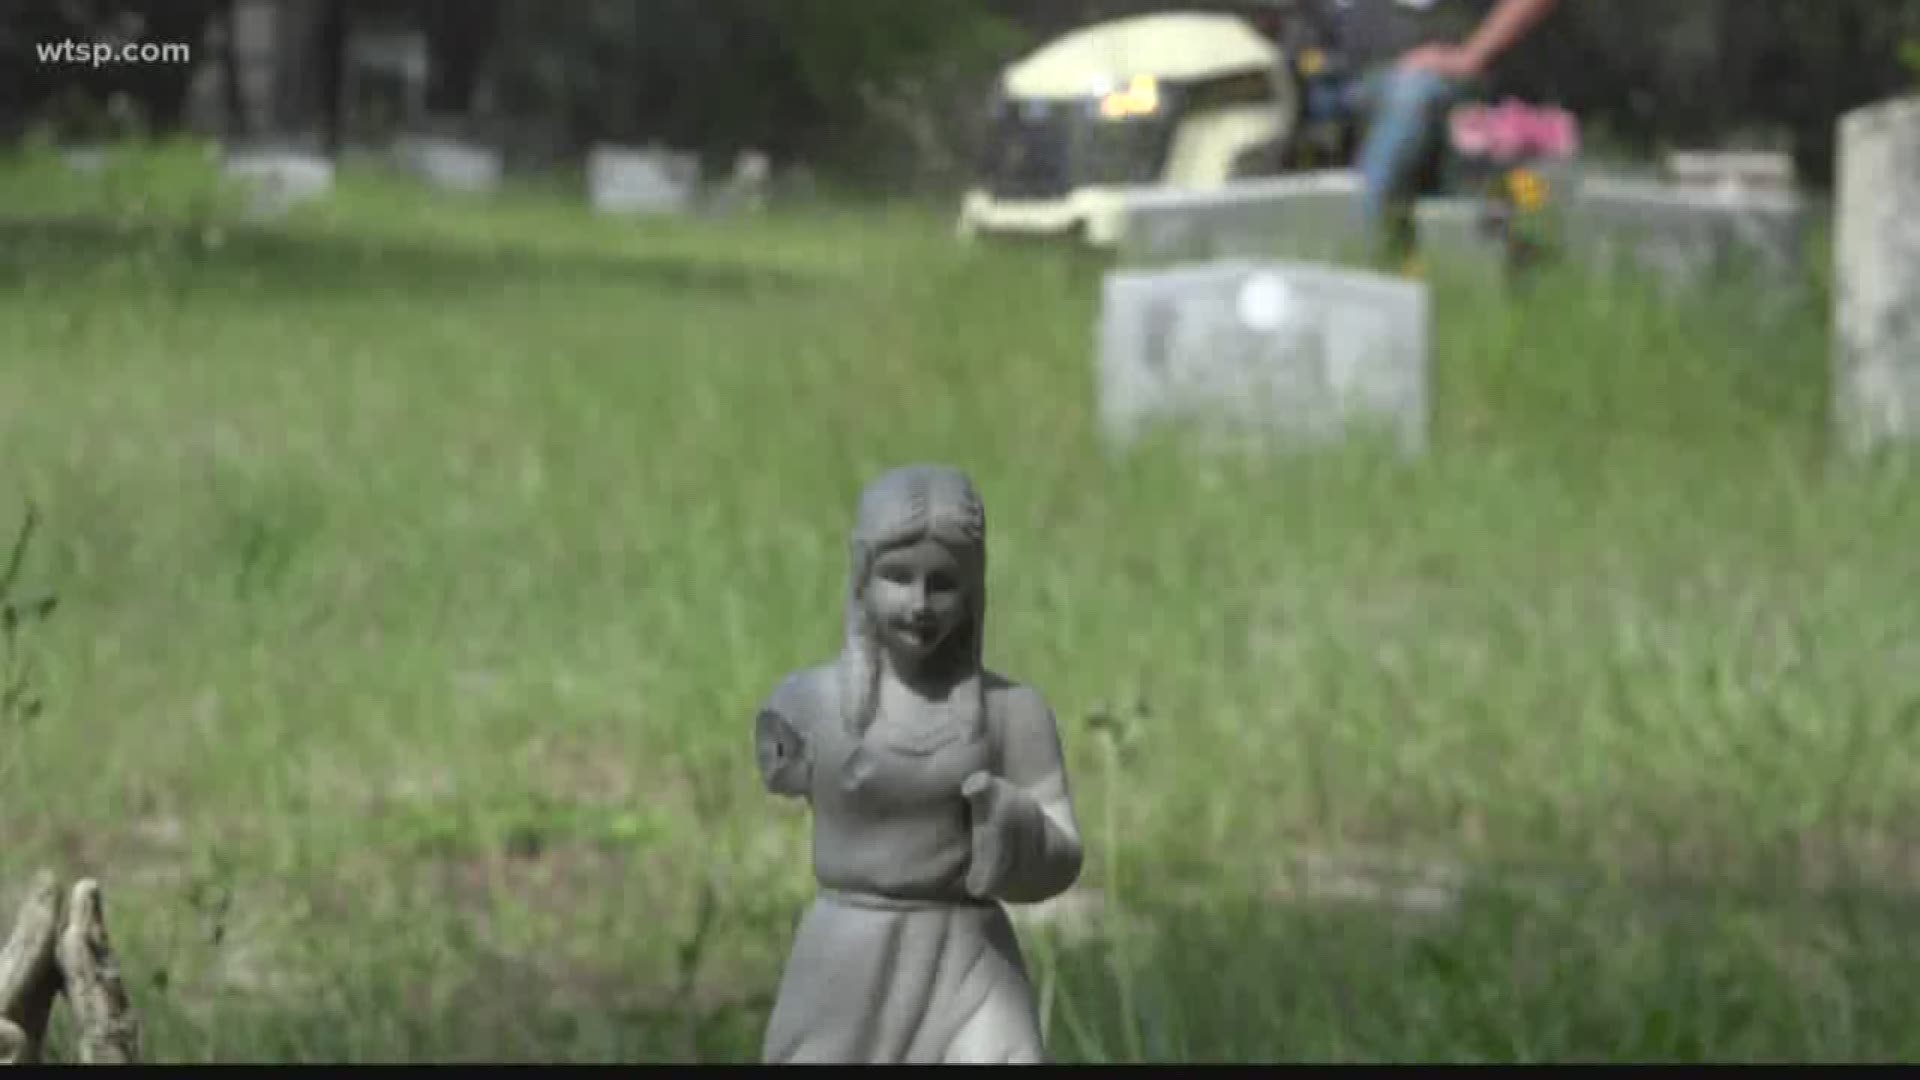 Michael Bunting’s riding lawn mower gurgled to life as the 74-year-old turned his wheels towards an overgrown plot of Hillsborough County. Dozens of his lost loved ones sit buried beneath the dirt.

The Samford Cemetery has fallen into despair.